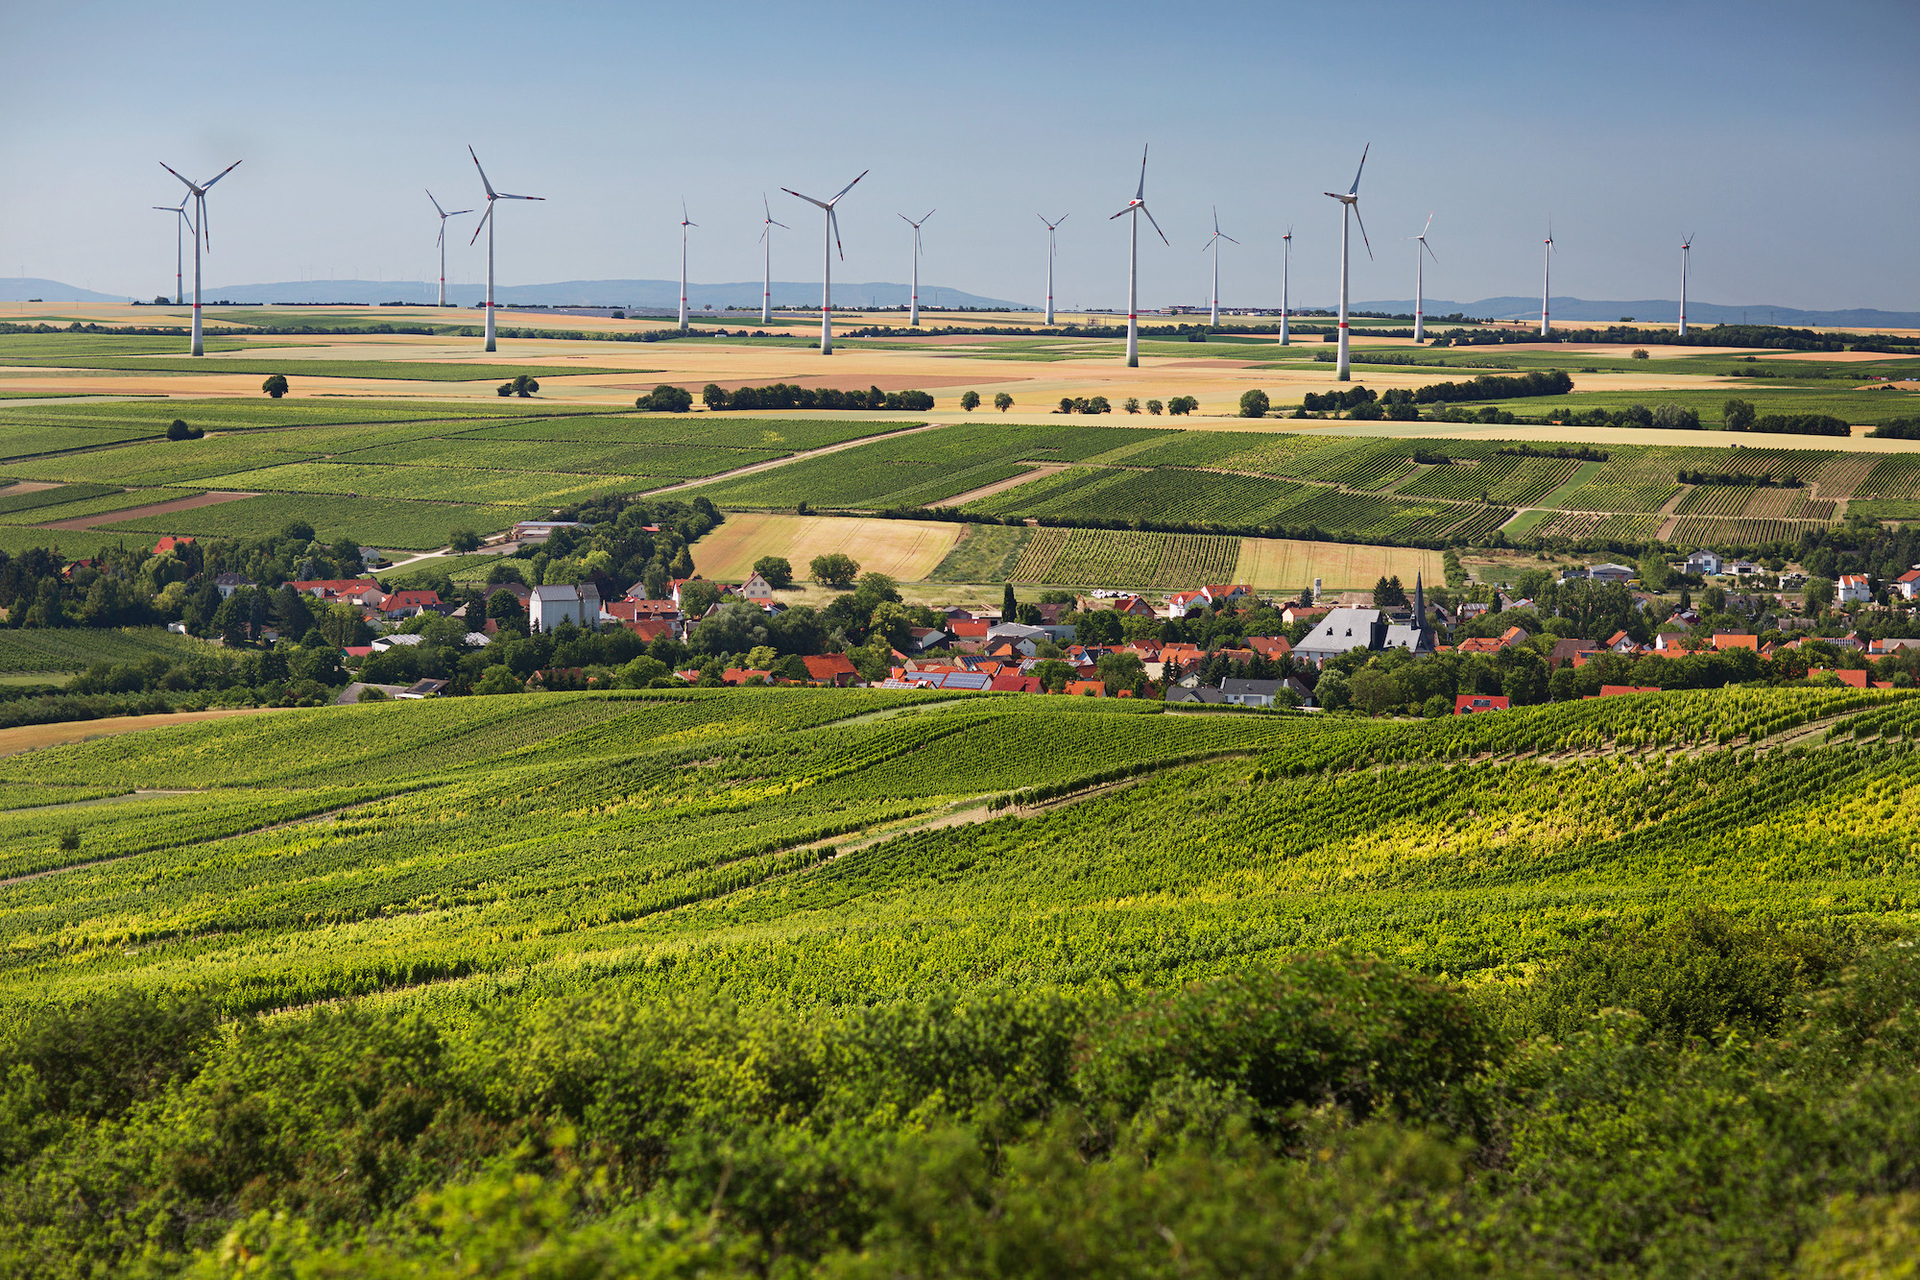 View over the winegrowing region Rheinhessen with vineyards in the foreground and a wind farm in the background